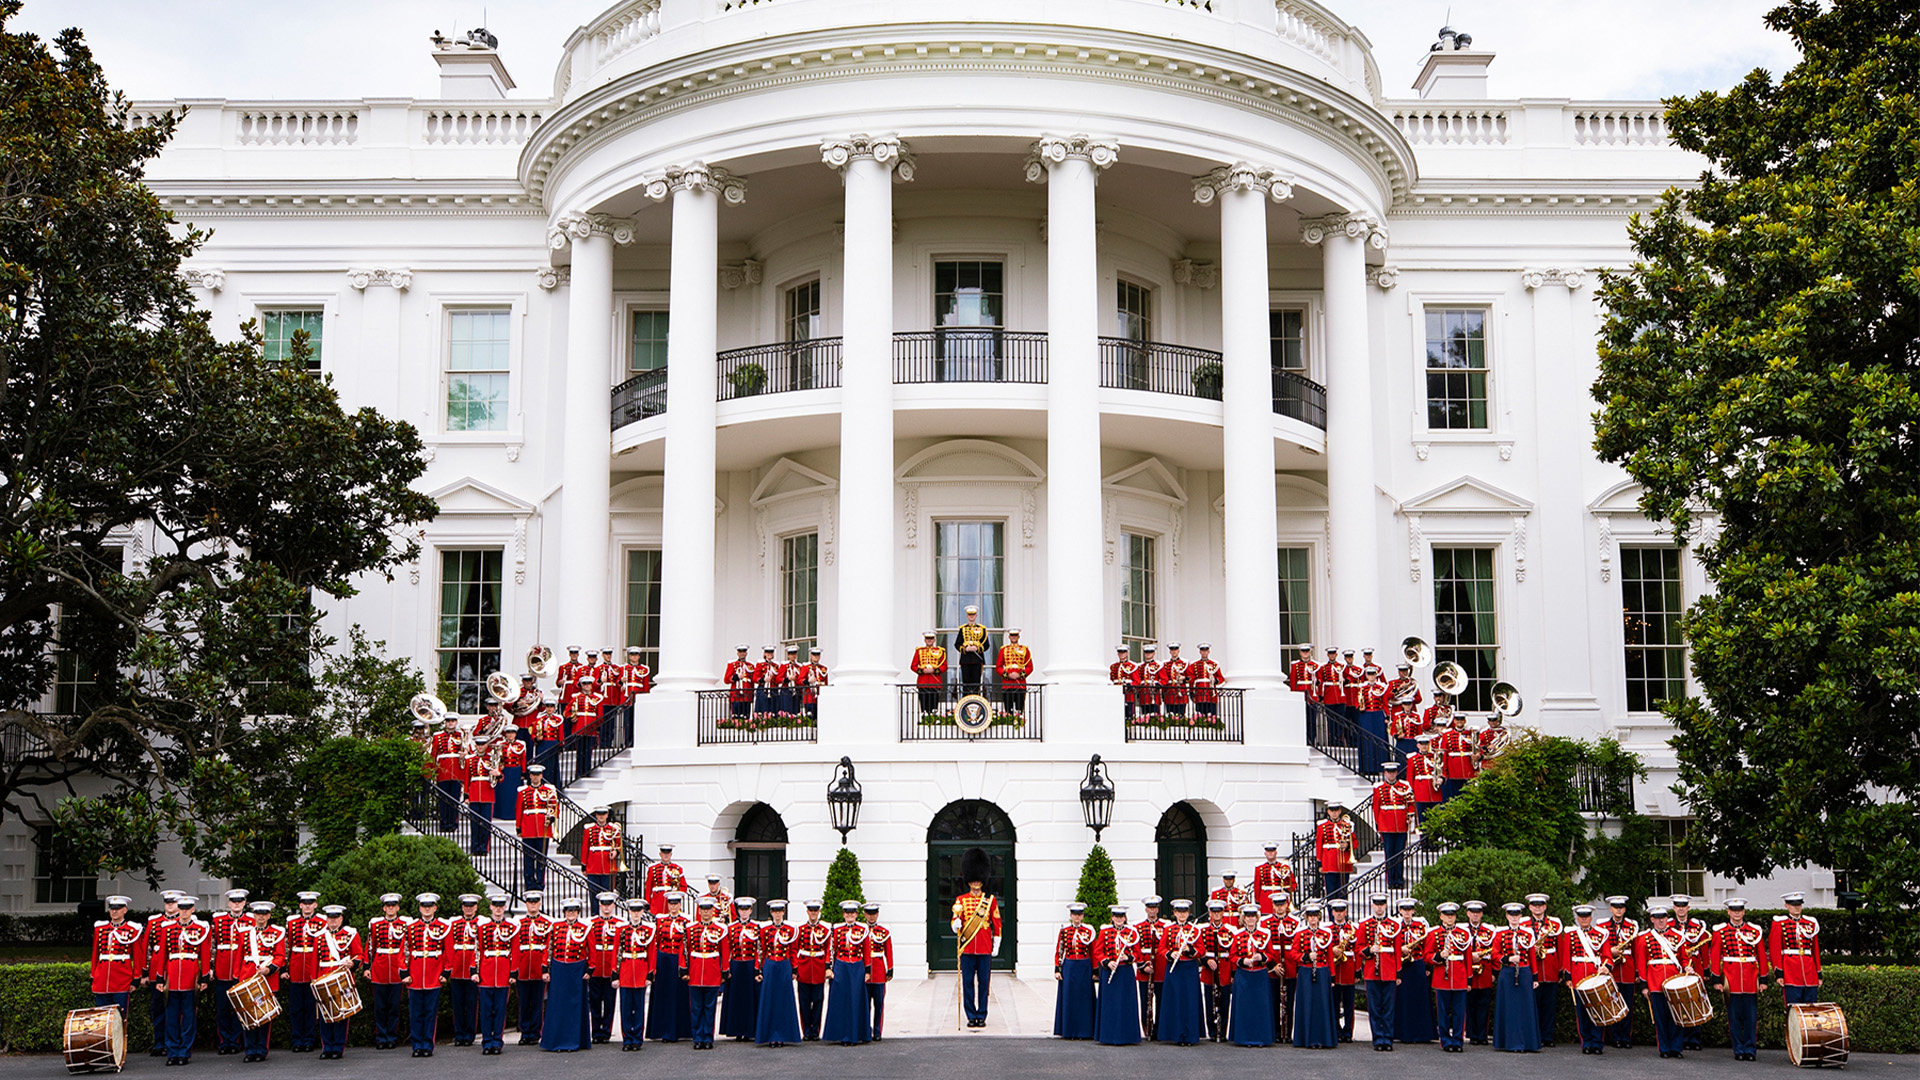 Band in red uniforms at The White House